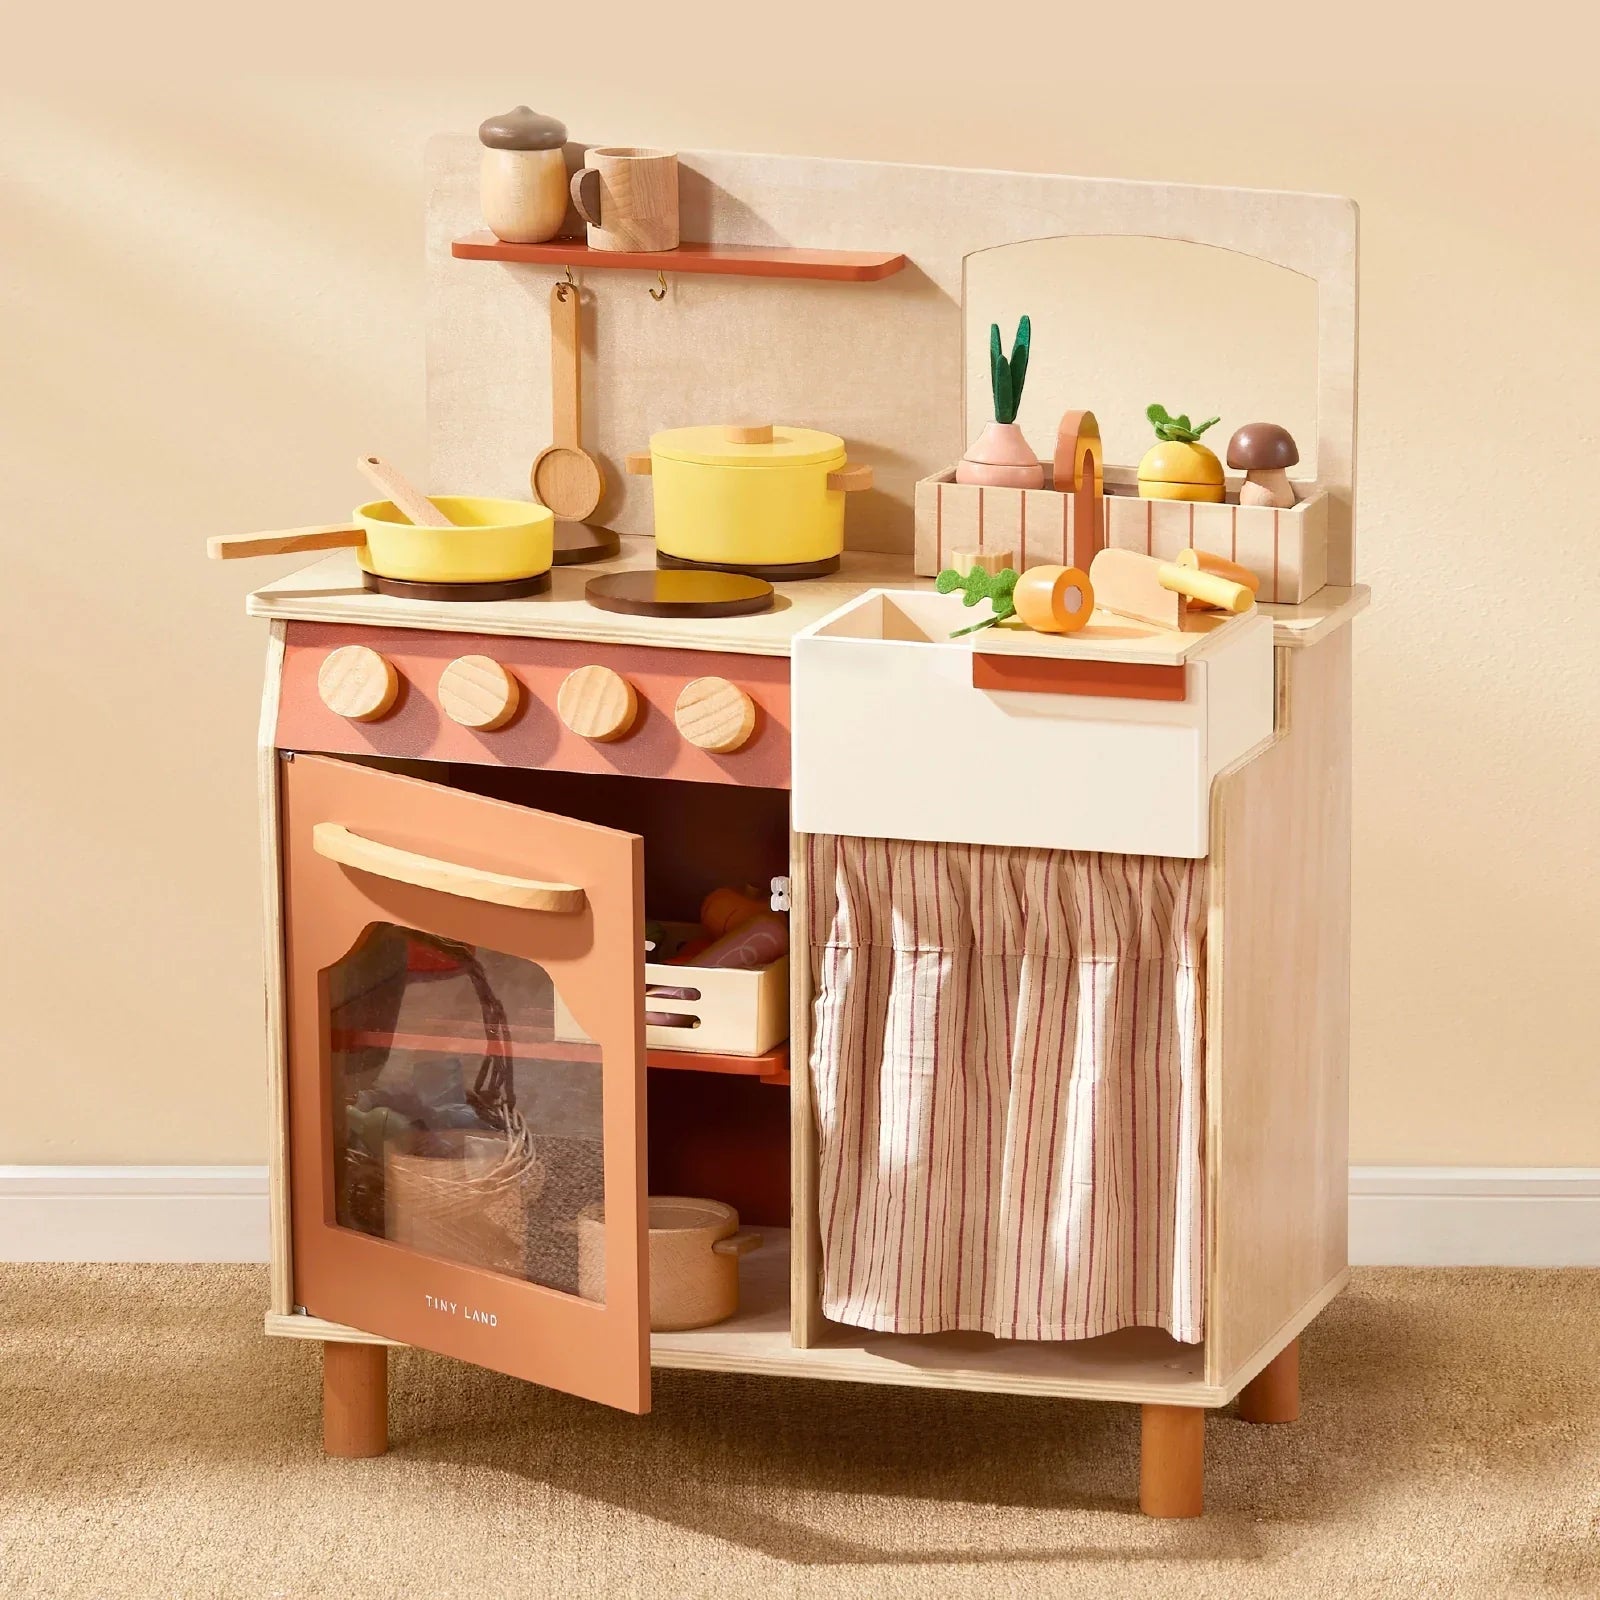 Modern Play Kitchen Stove and Oven